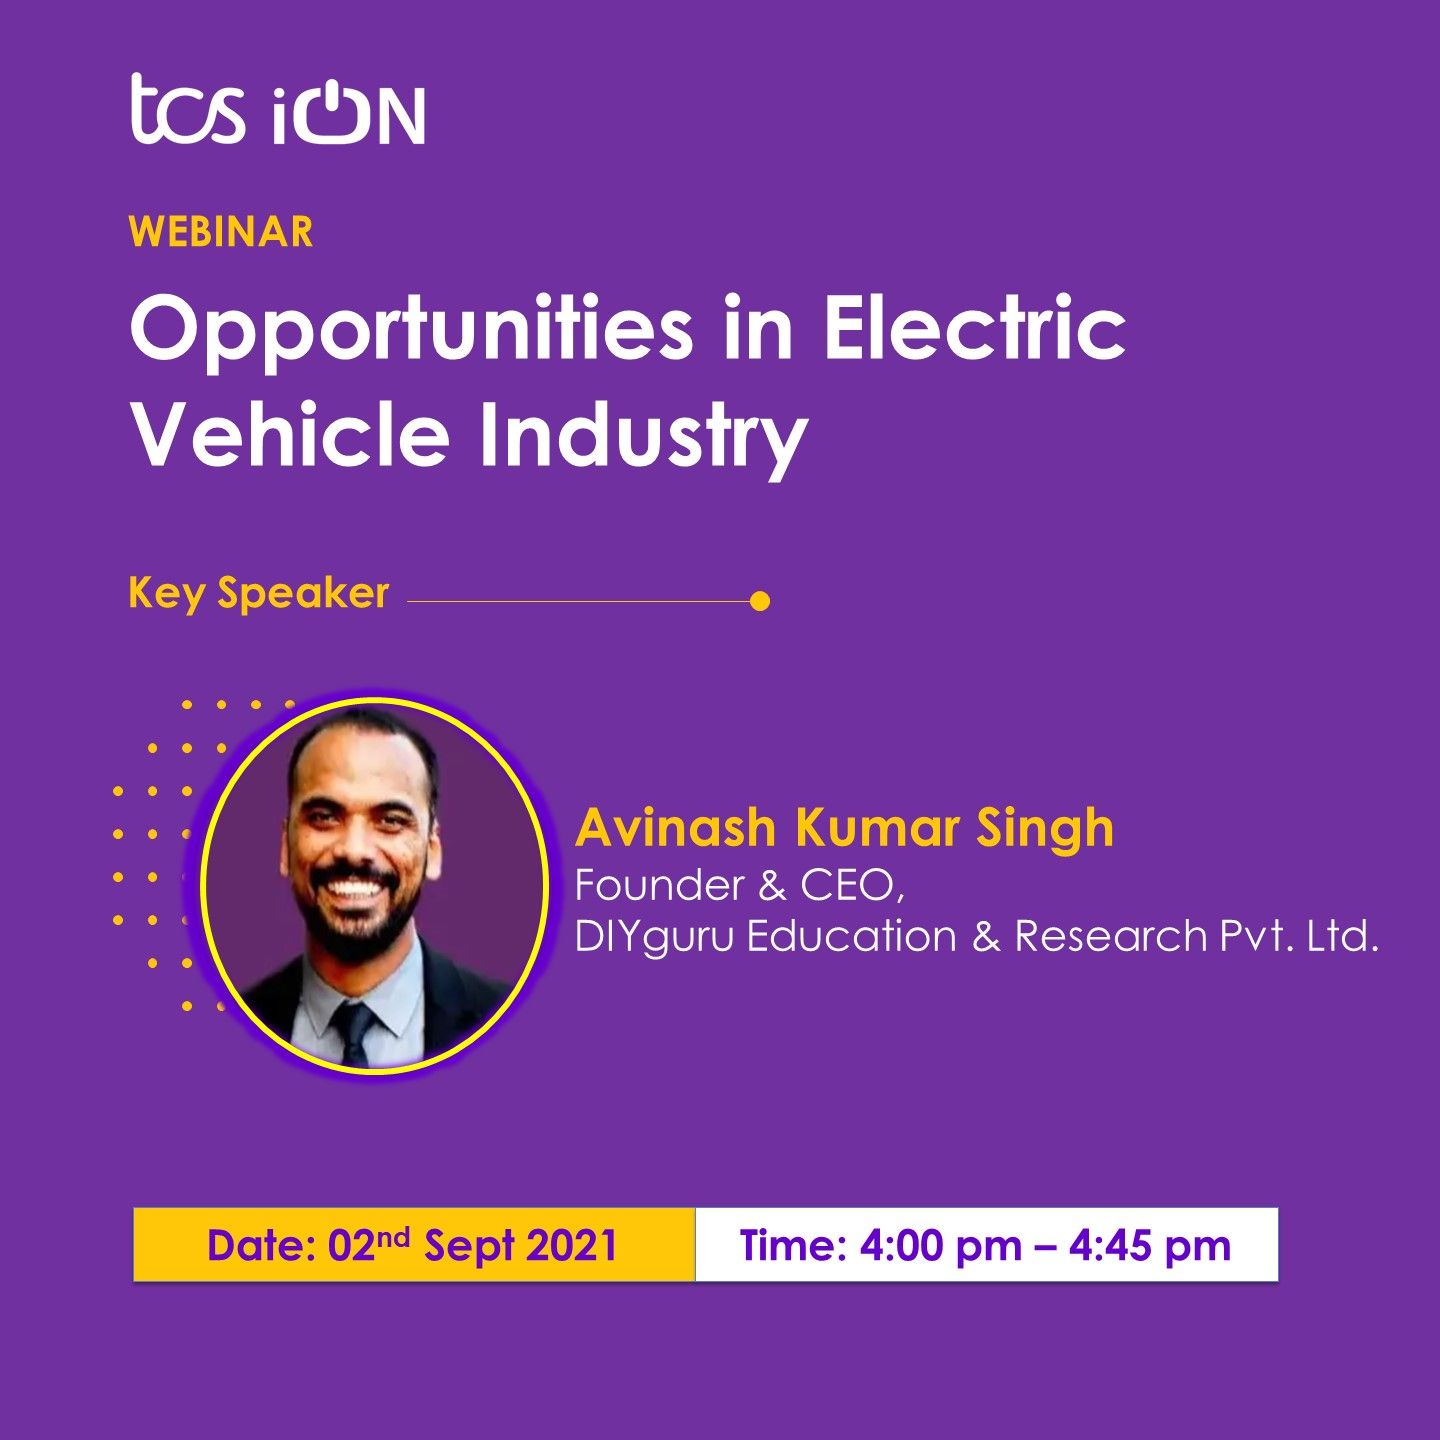 TCS iON Webinar on “Opportunities in Electric Vehicle Industry.”